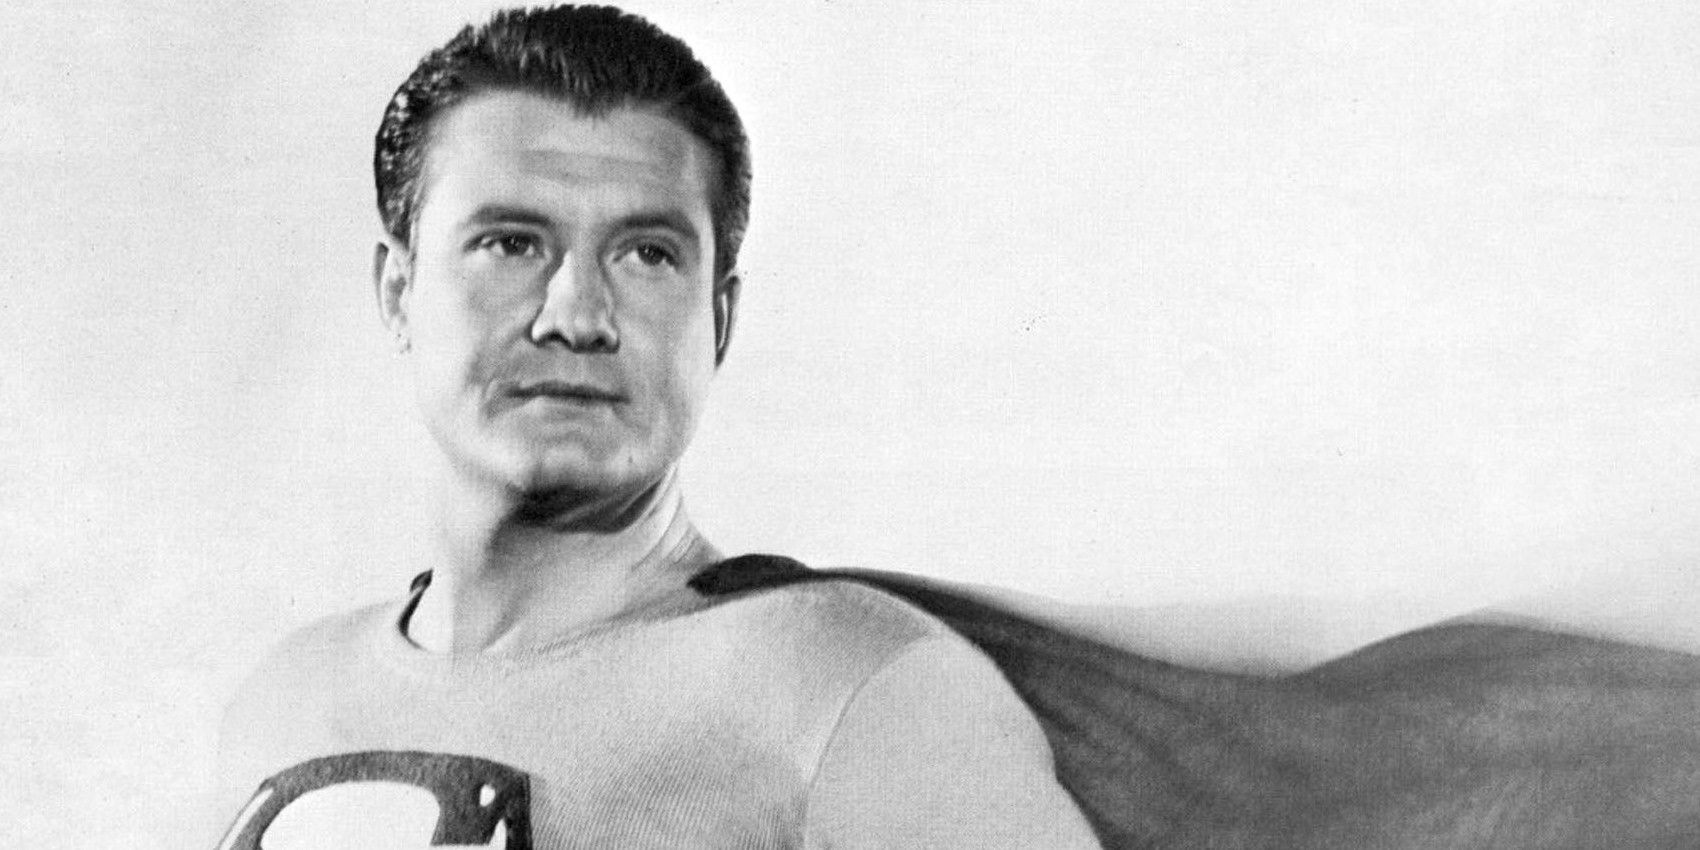 George Reeves as classic TV Superman